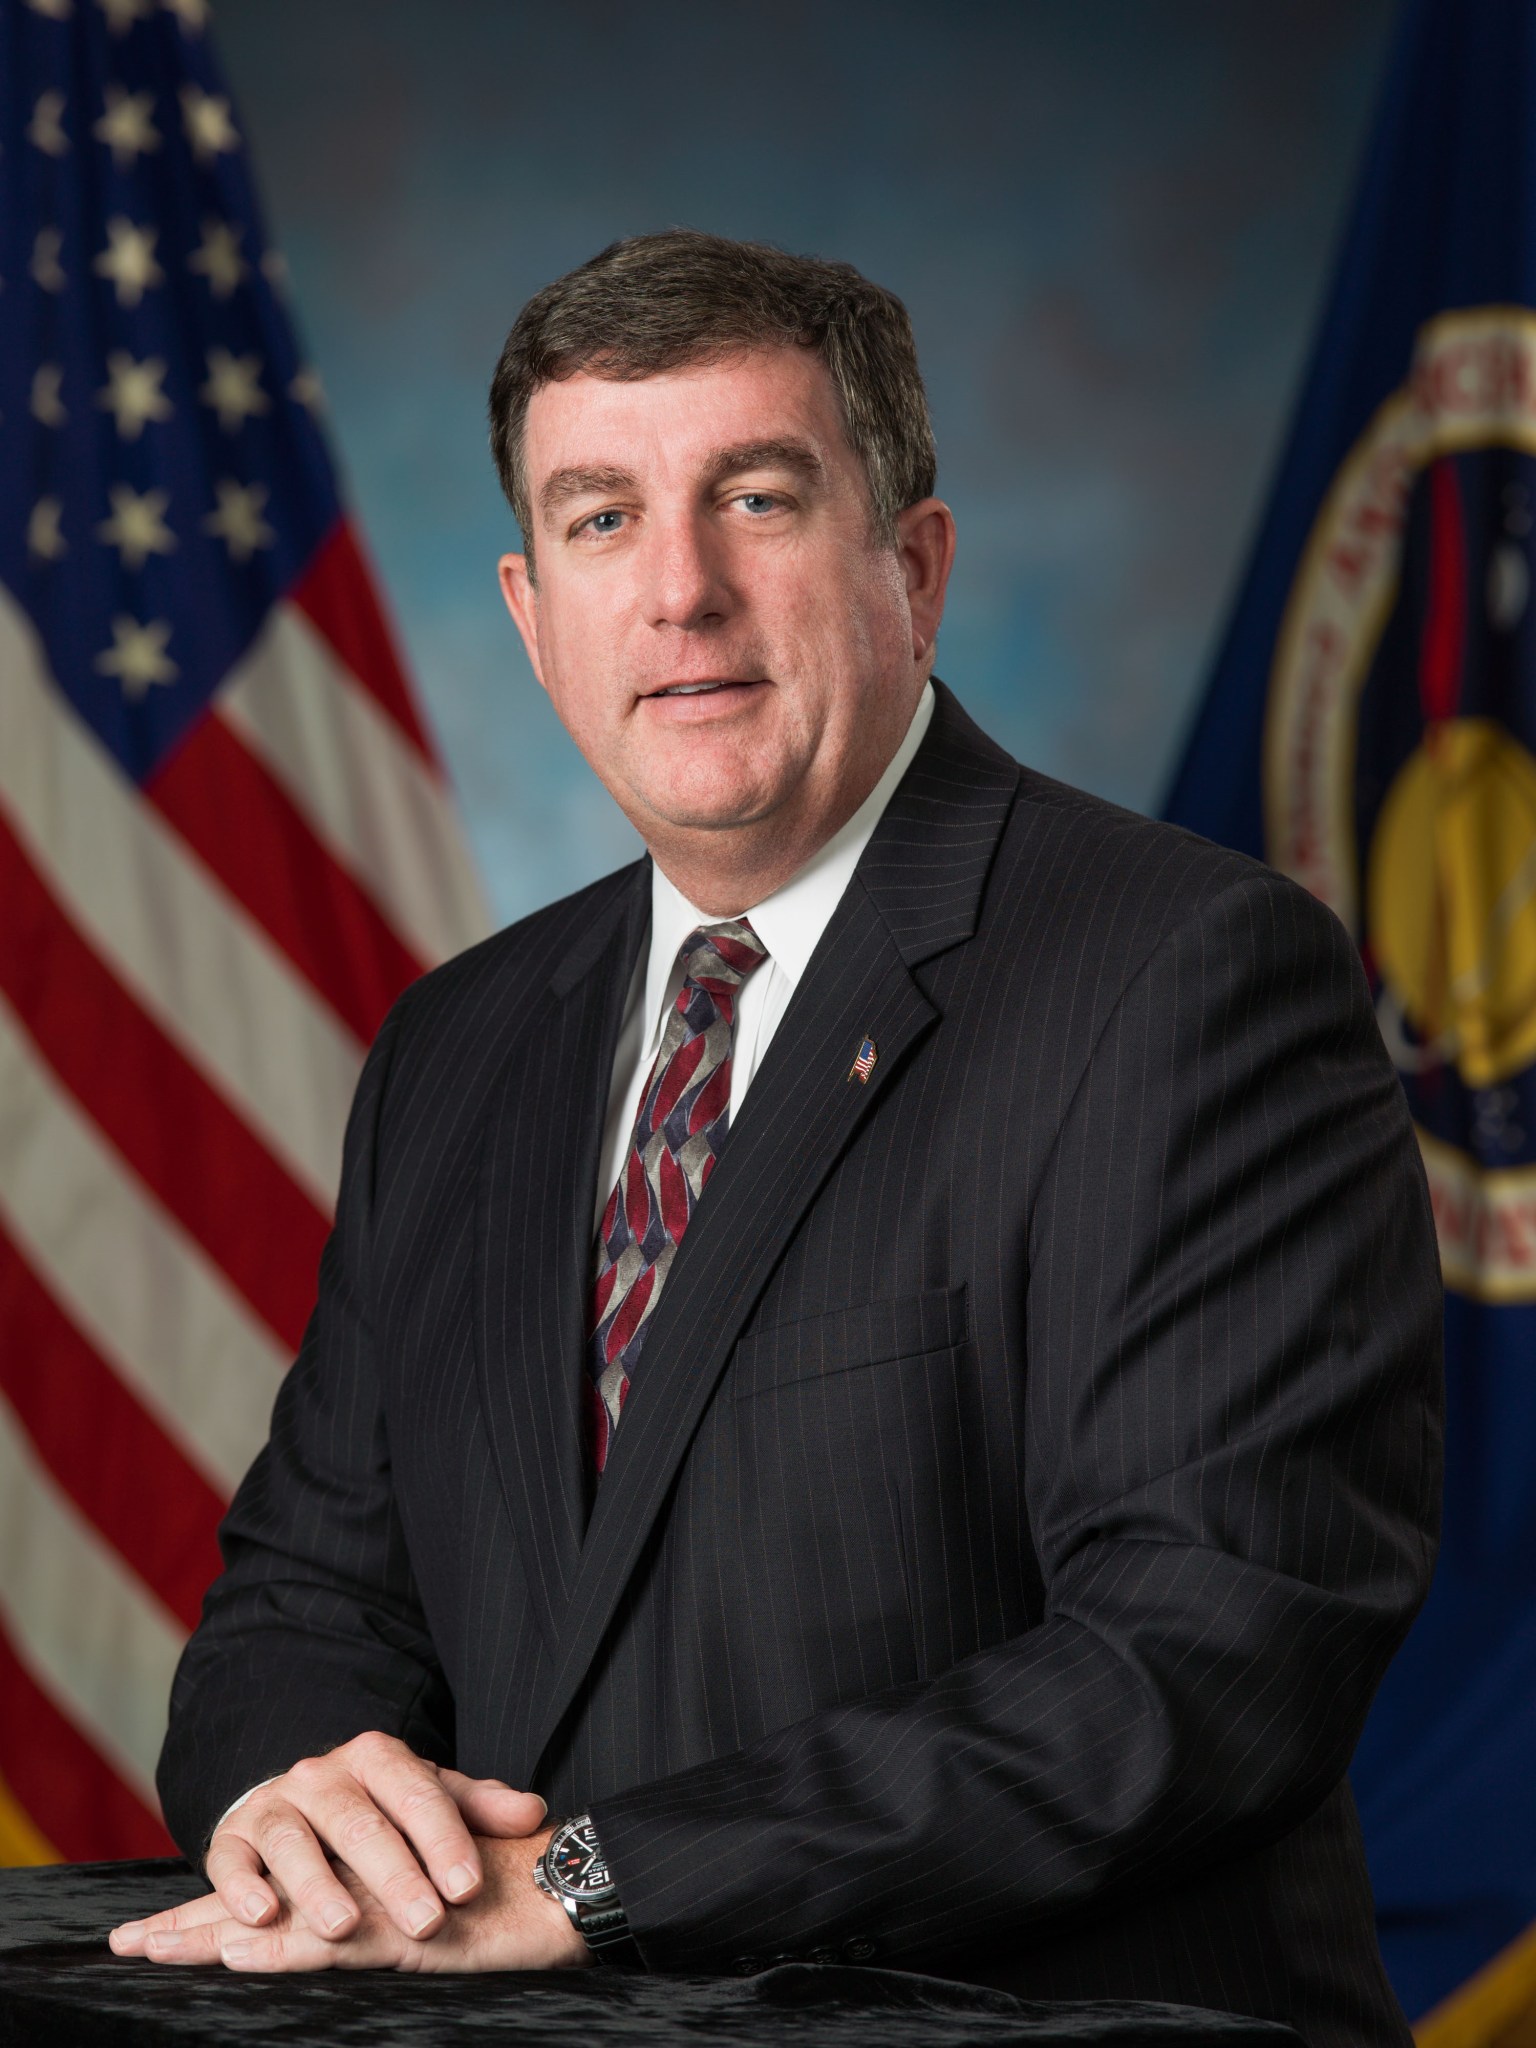 Kirk Shireman is presently serving as the International Space Station (ISS) Program Manager